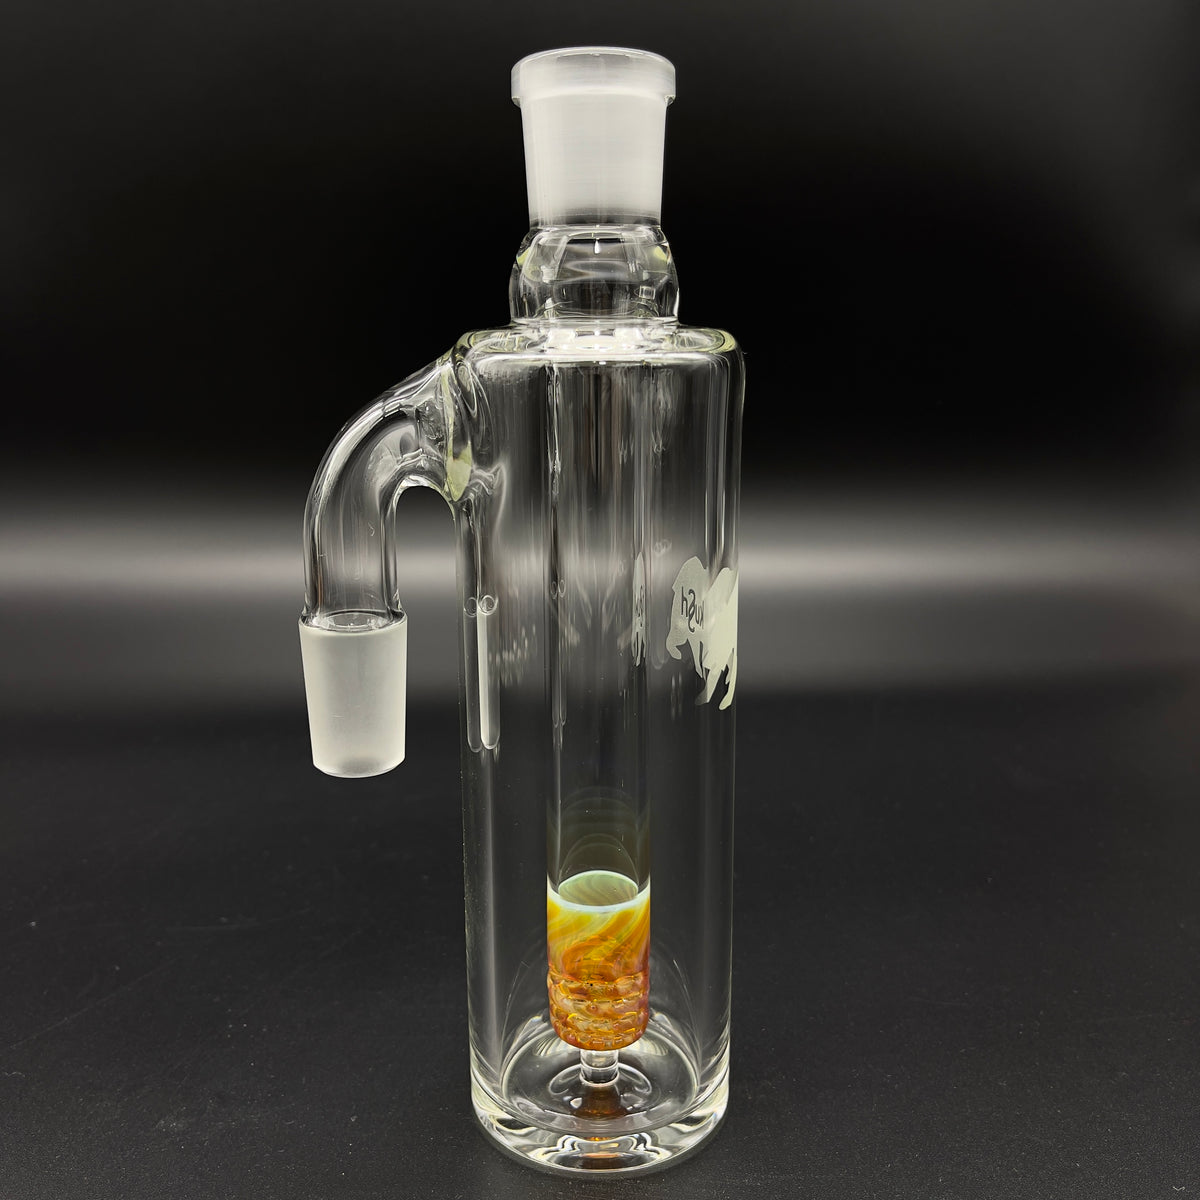 Four-Handle Amber Ash Catcher - 19mm/19mm